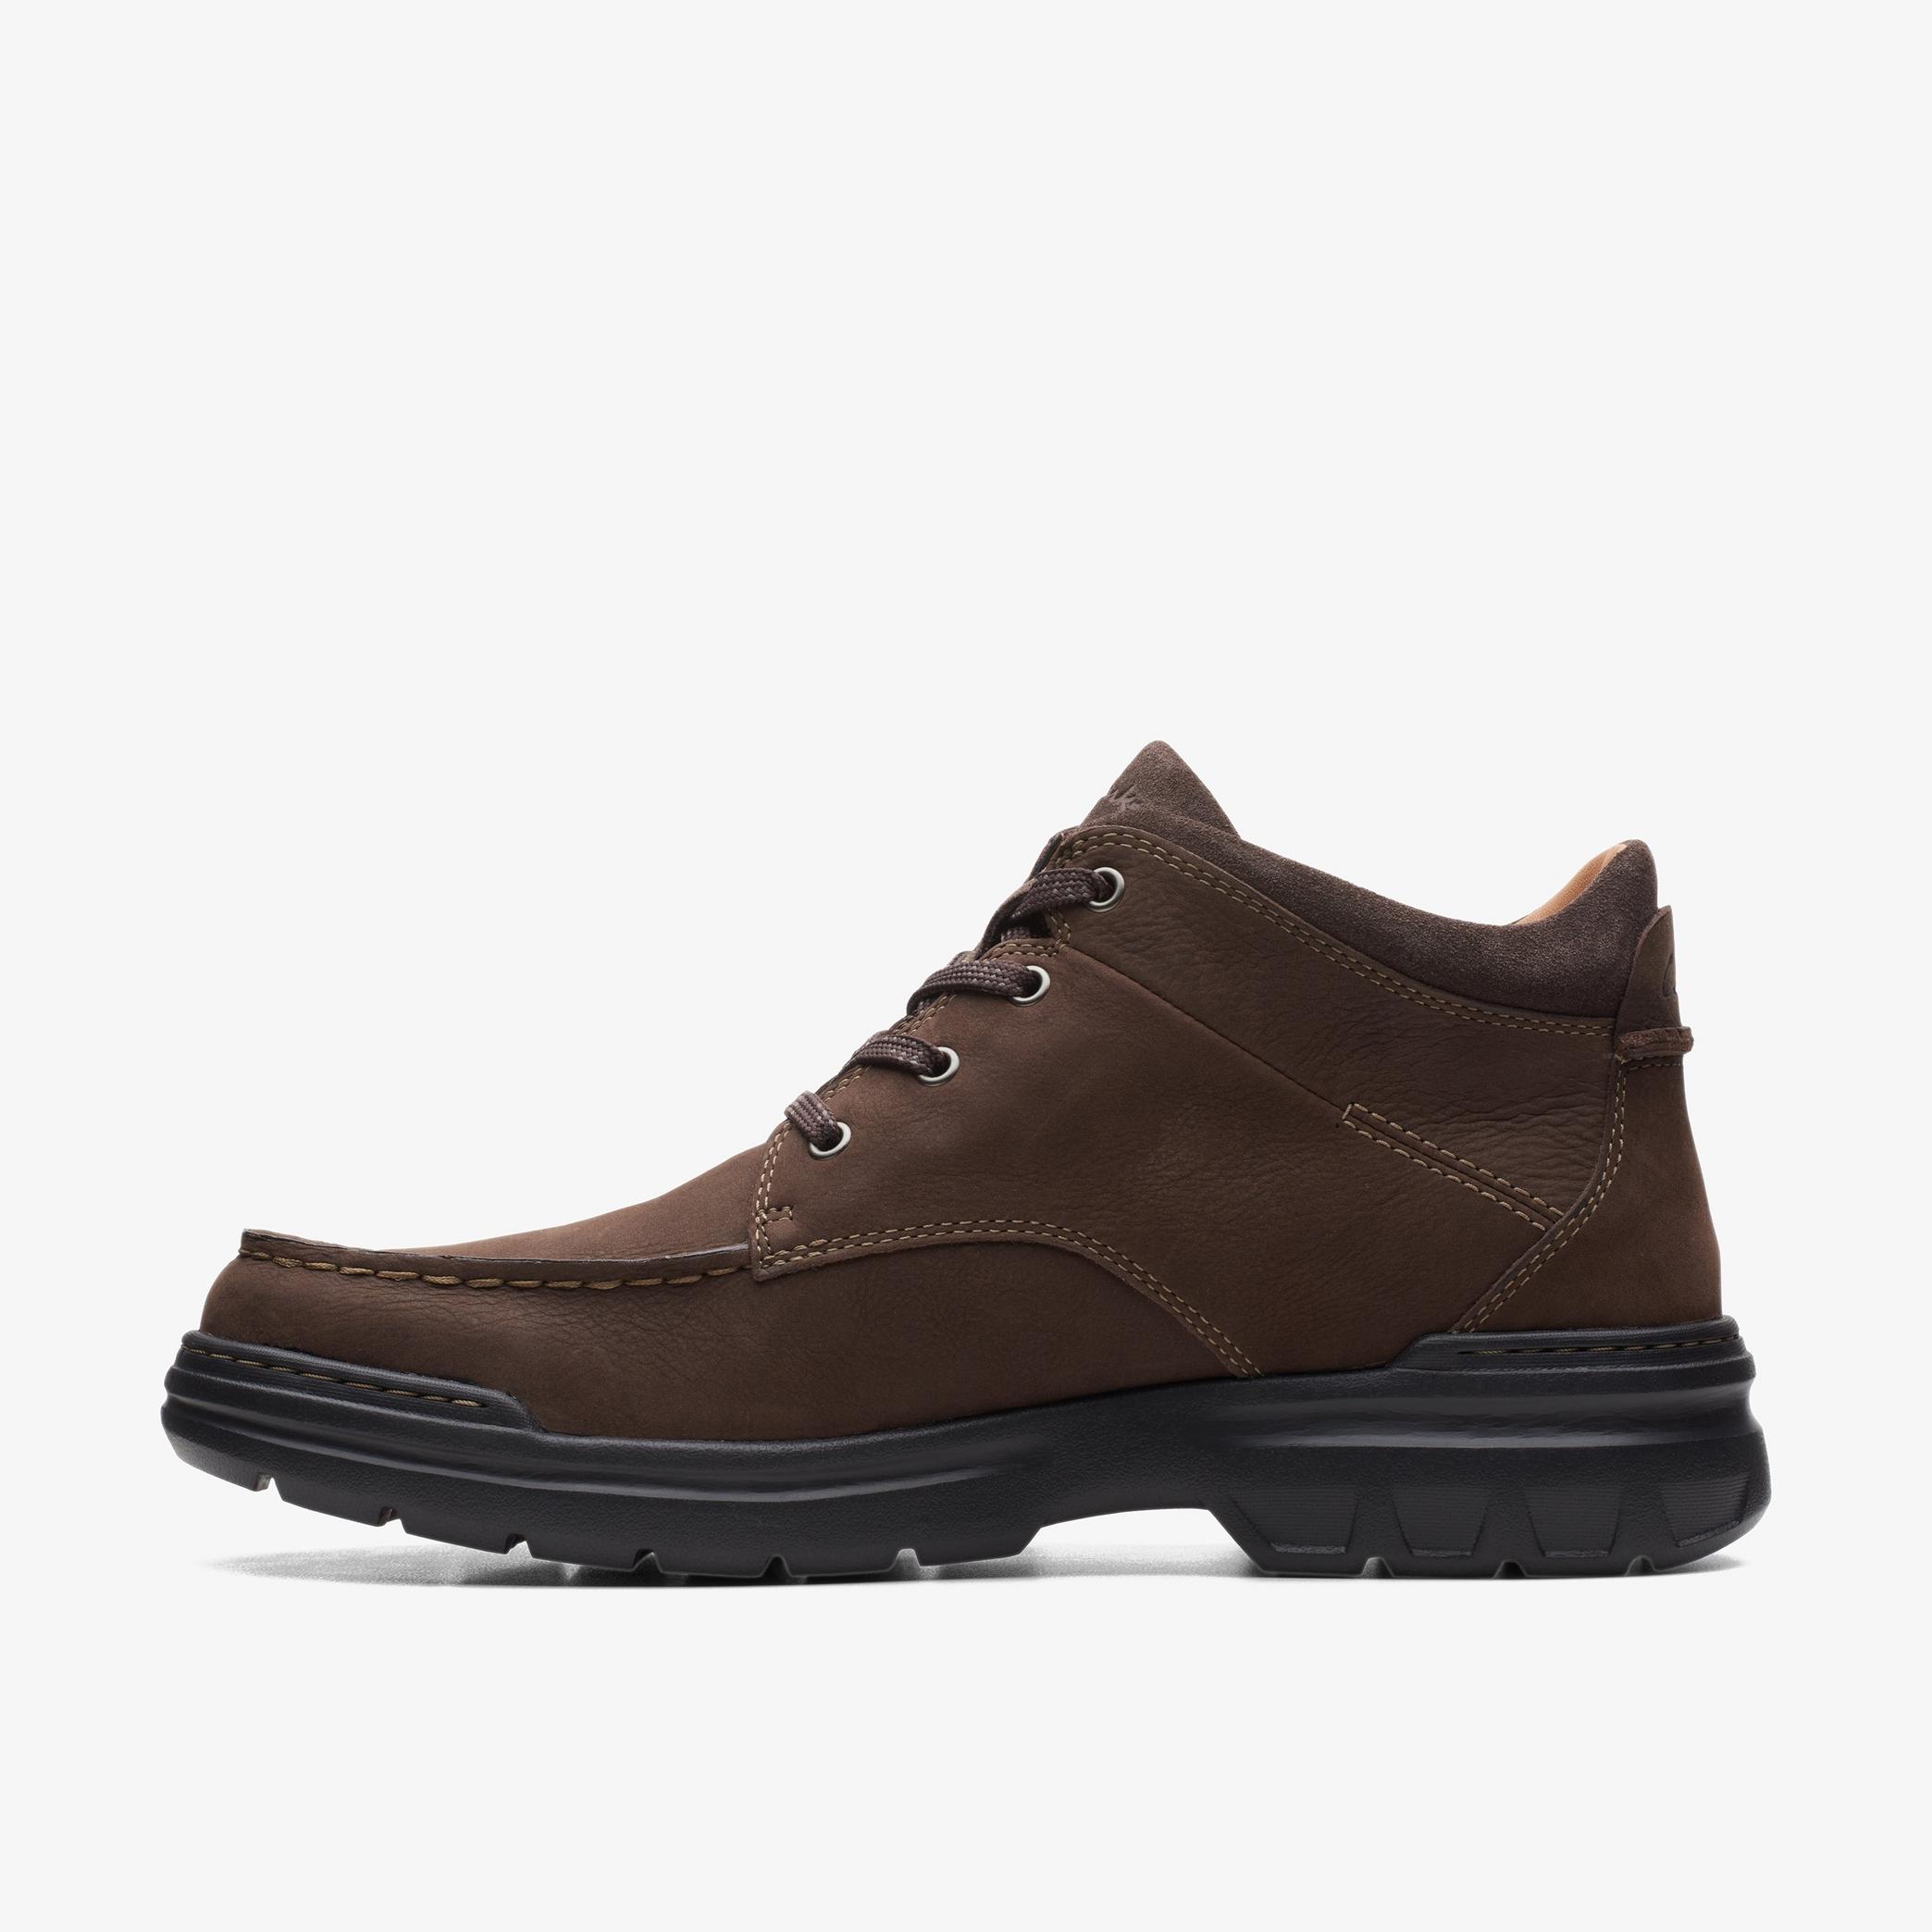 Rockie2 Hi GTX Brown Nubuck Ankle Boots, view 2 of 6